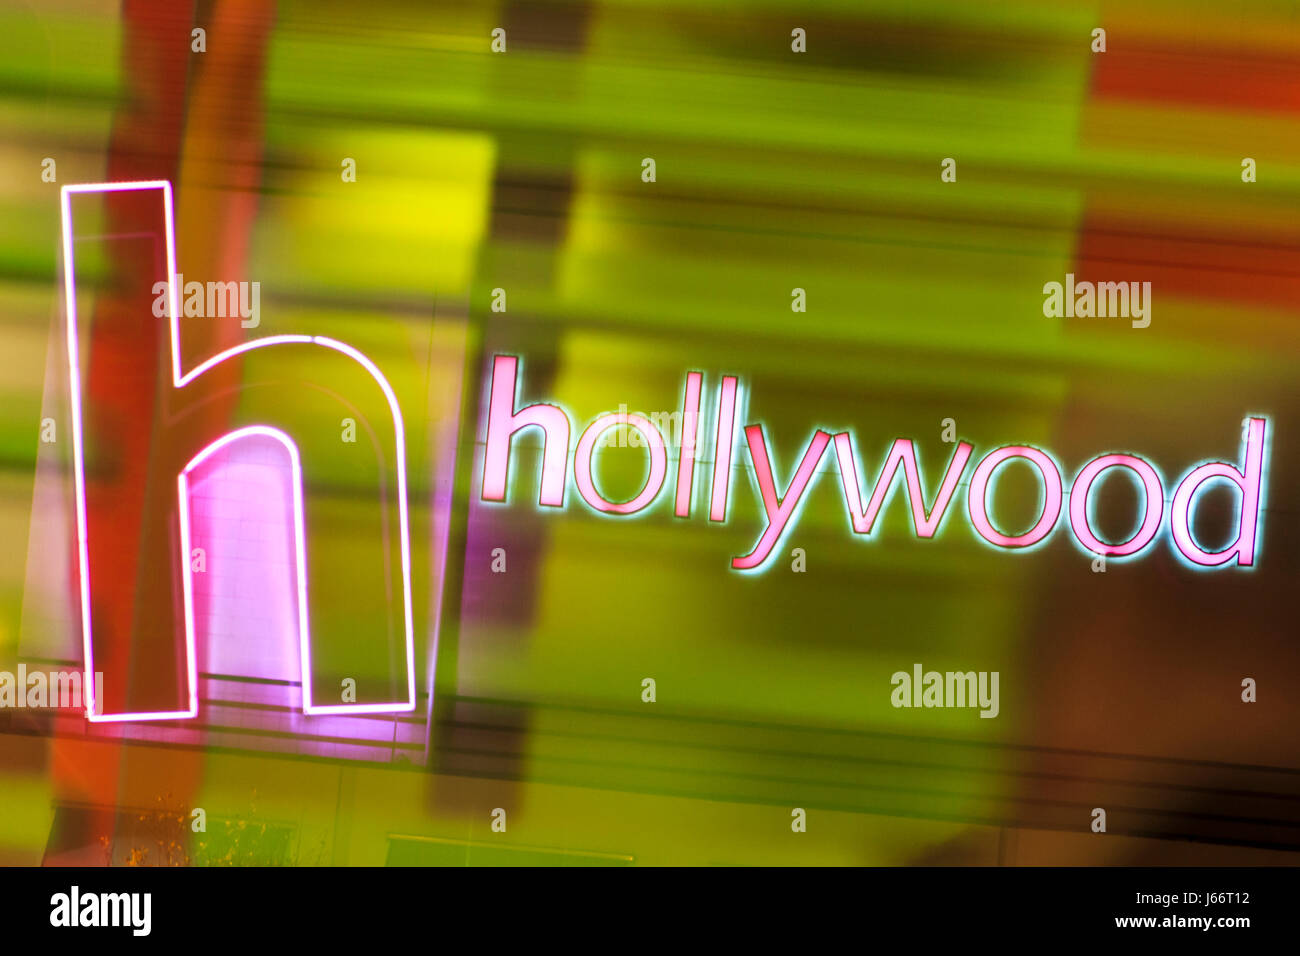 Pink neon Hollywood sign reflected in a green-lit glass window Stock Photo